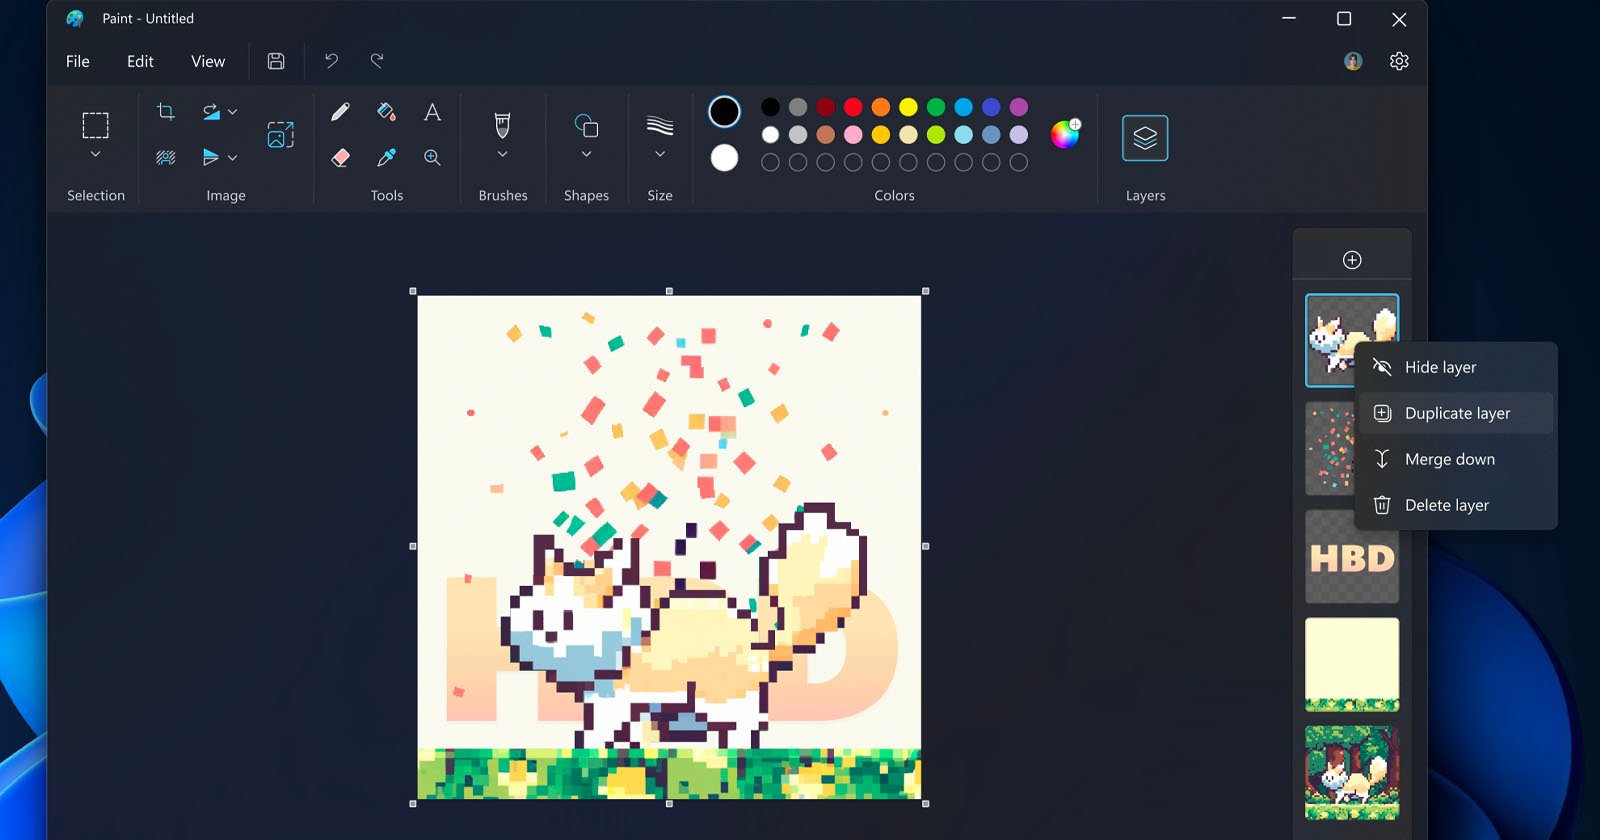 Microsoft Paint is Getting Photoshop-Like Layers and Transparency